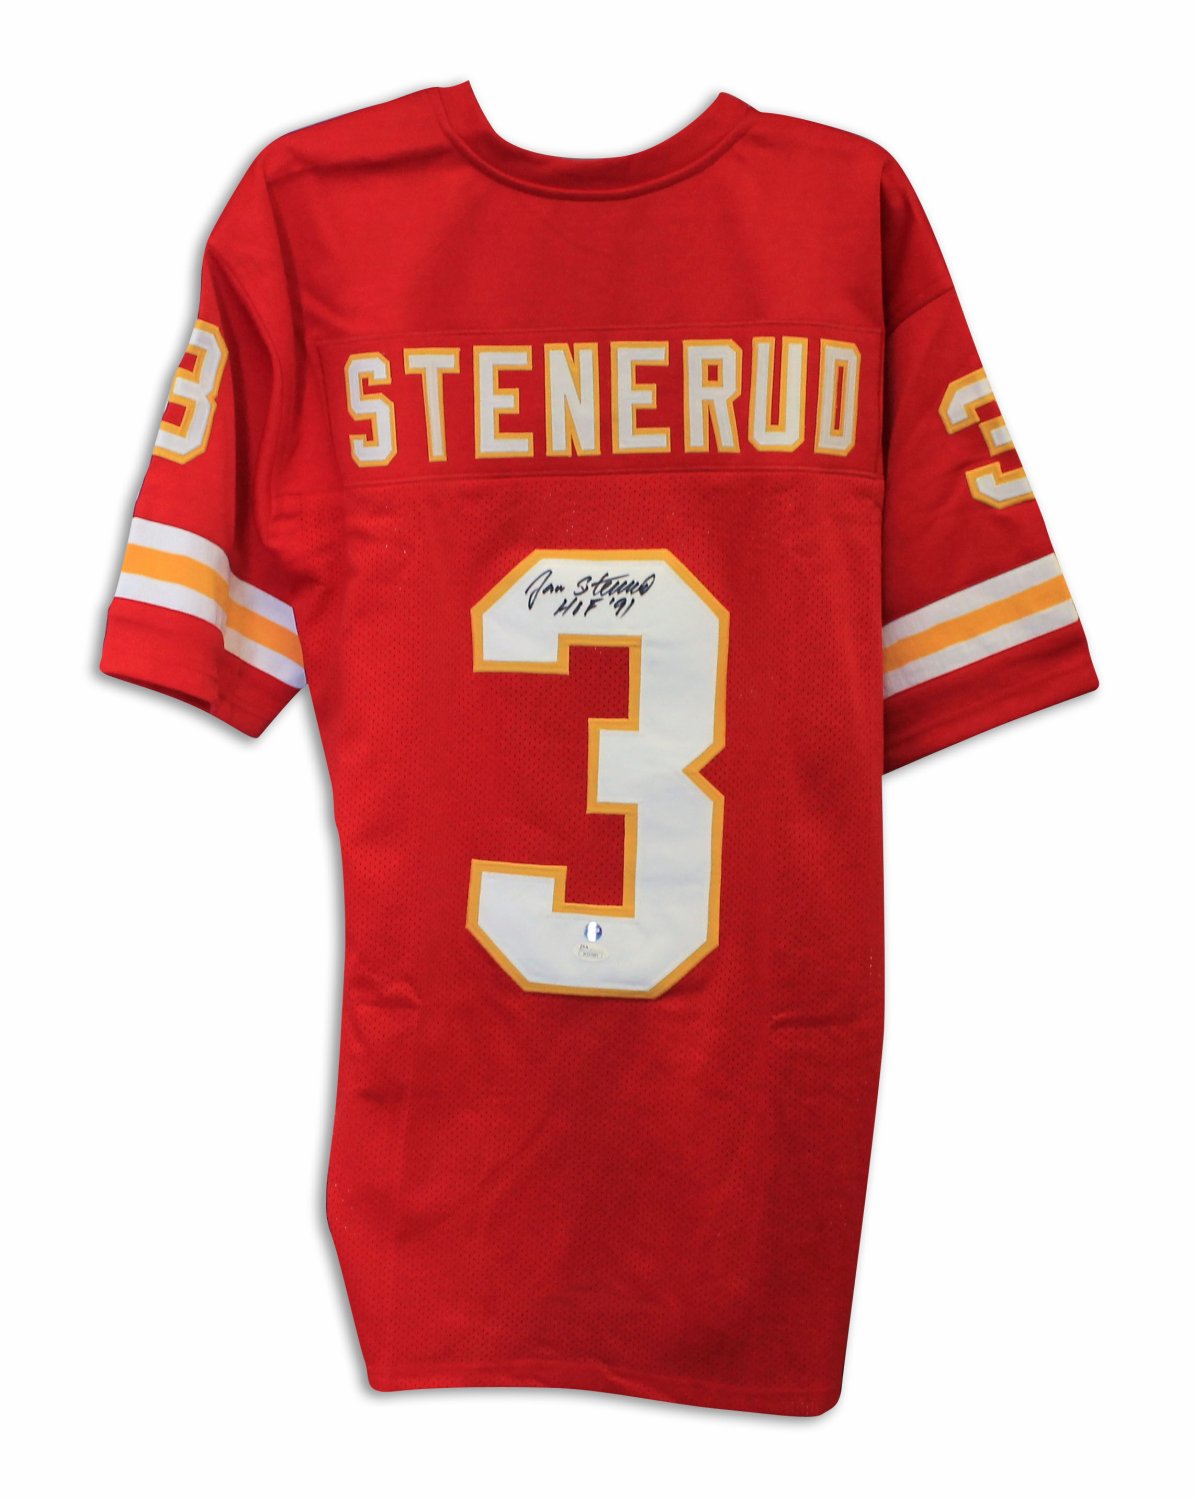 Jan Stenerud Kansas City Chiefs Autographed Signed Red Throwback Jersey  Inscribed 'HOF 91